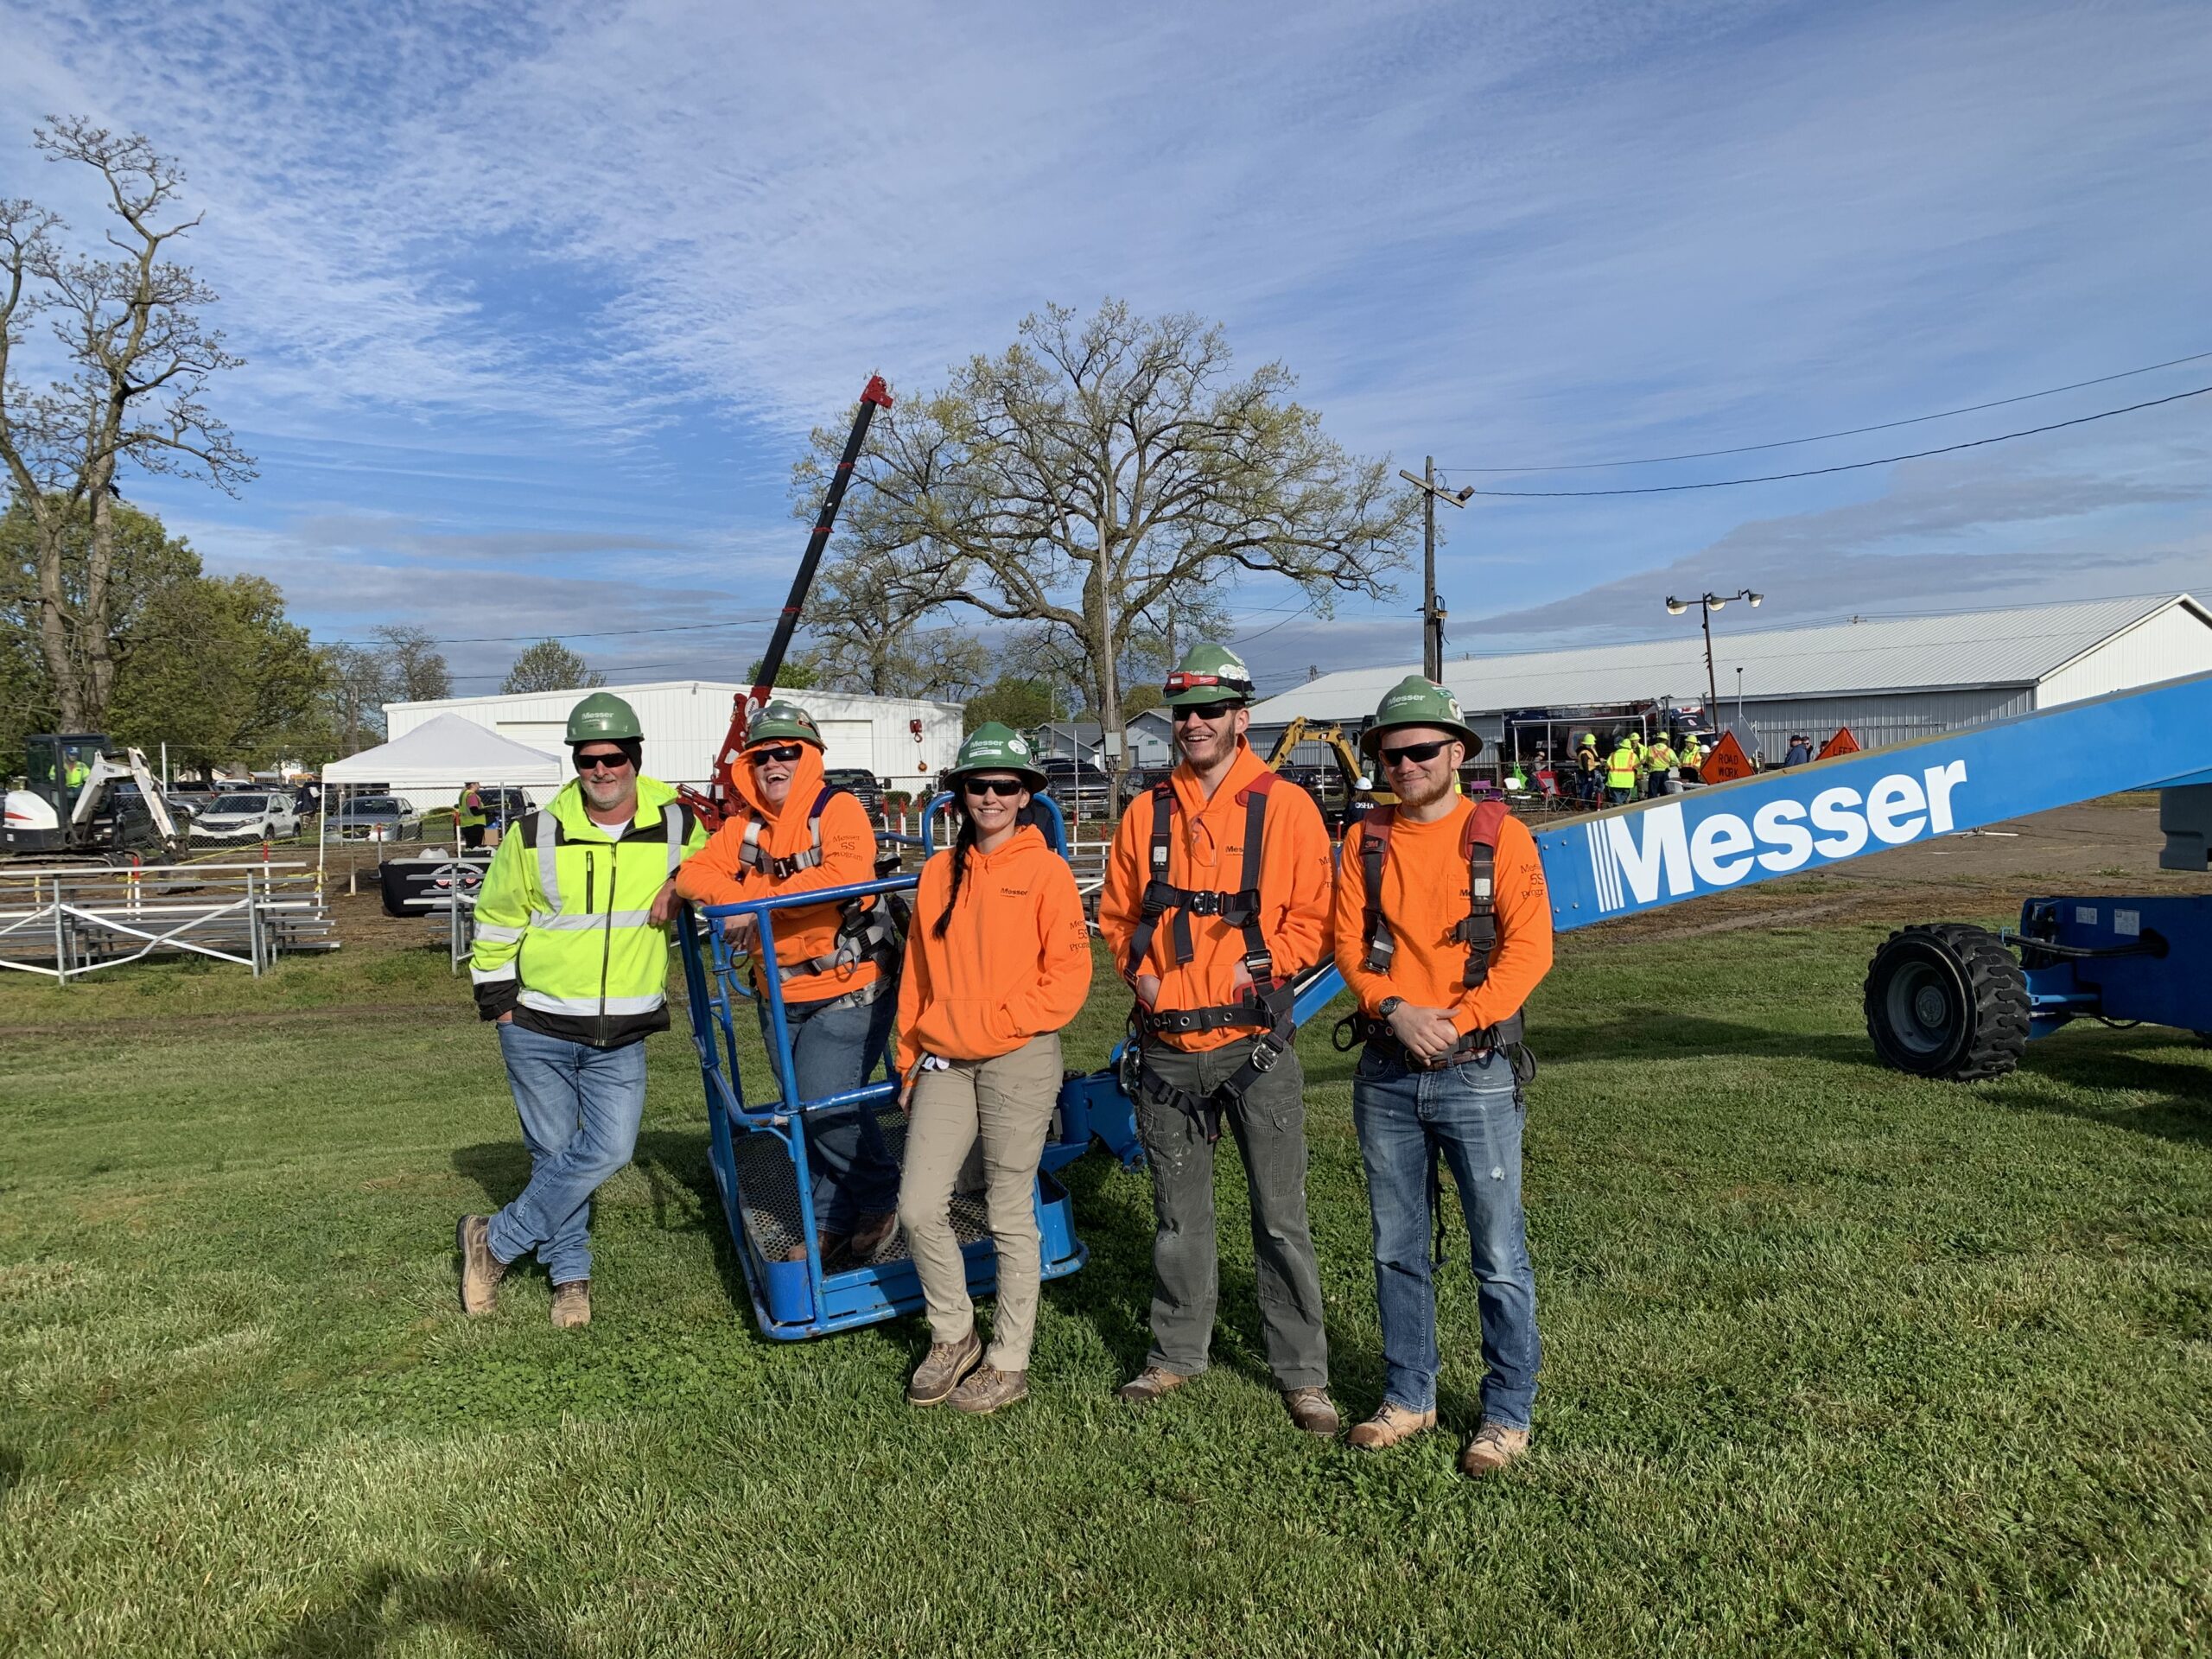 Messer Construction Company employees in PPE at event